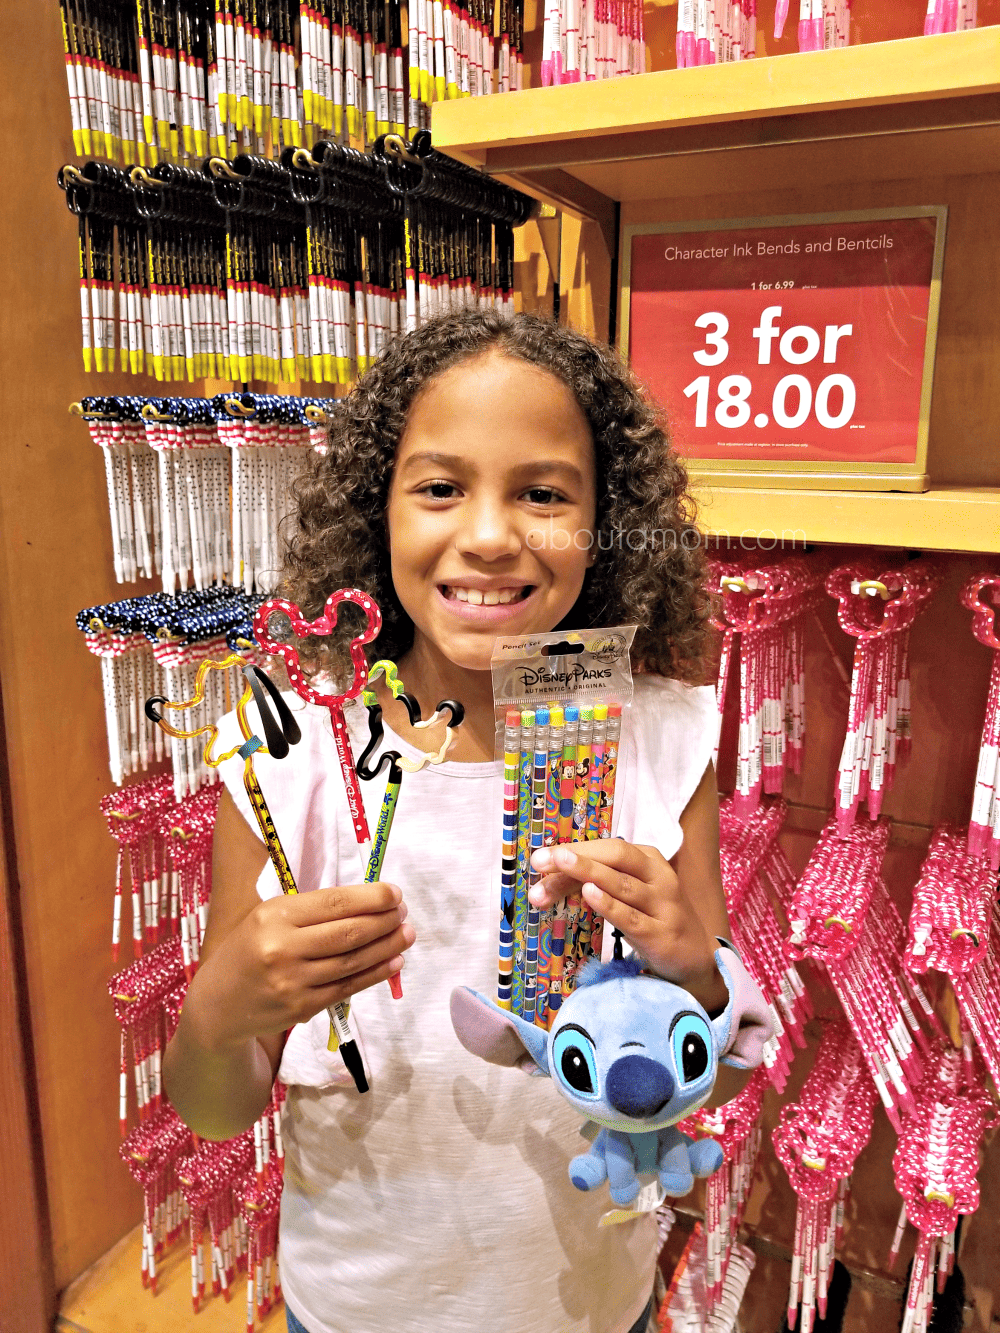 Insider's Guide to back to school shopping at Disney Springs. At Disney Springs you will find all of your back to school staples, along with a large selection of kids' clothing and accessories.